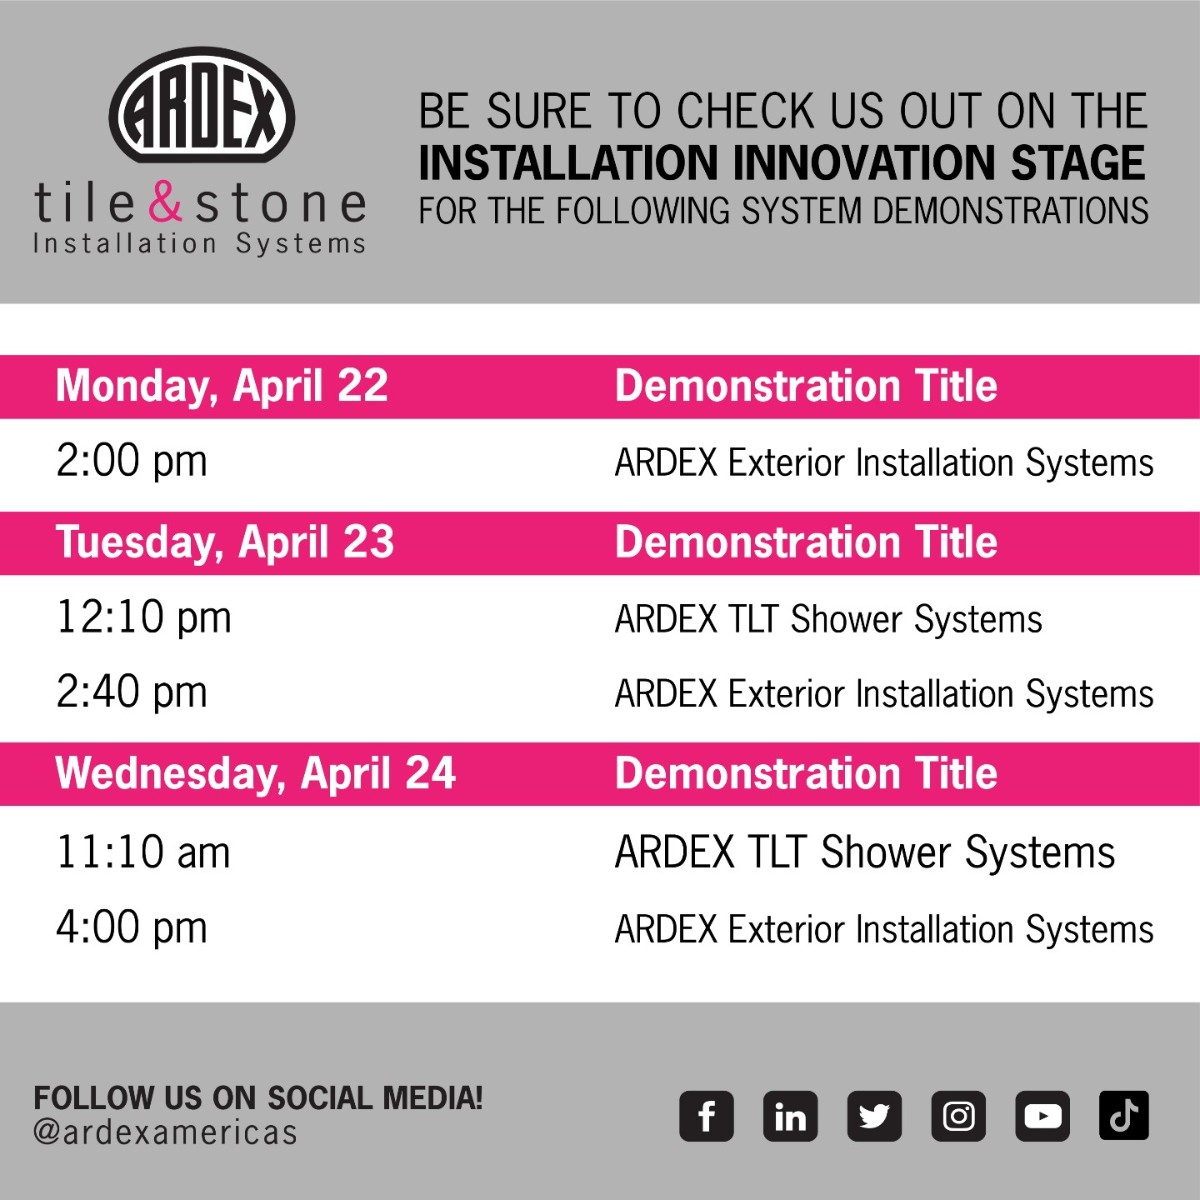 🎉 Going to Coverings?? 🤩 Stop by the Installation Innovation Stage for some exciting ARDEX System demonstrations! 🔍 Check out our schedule below. 📅 Hope to see you there!! 😁 #ARDEXAmericas #Coverings2024 #ARDEXExterior #ARDEXTLT